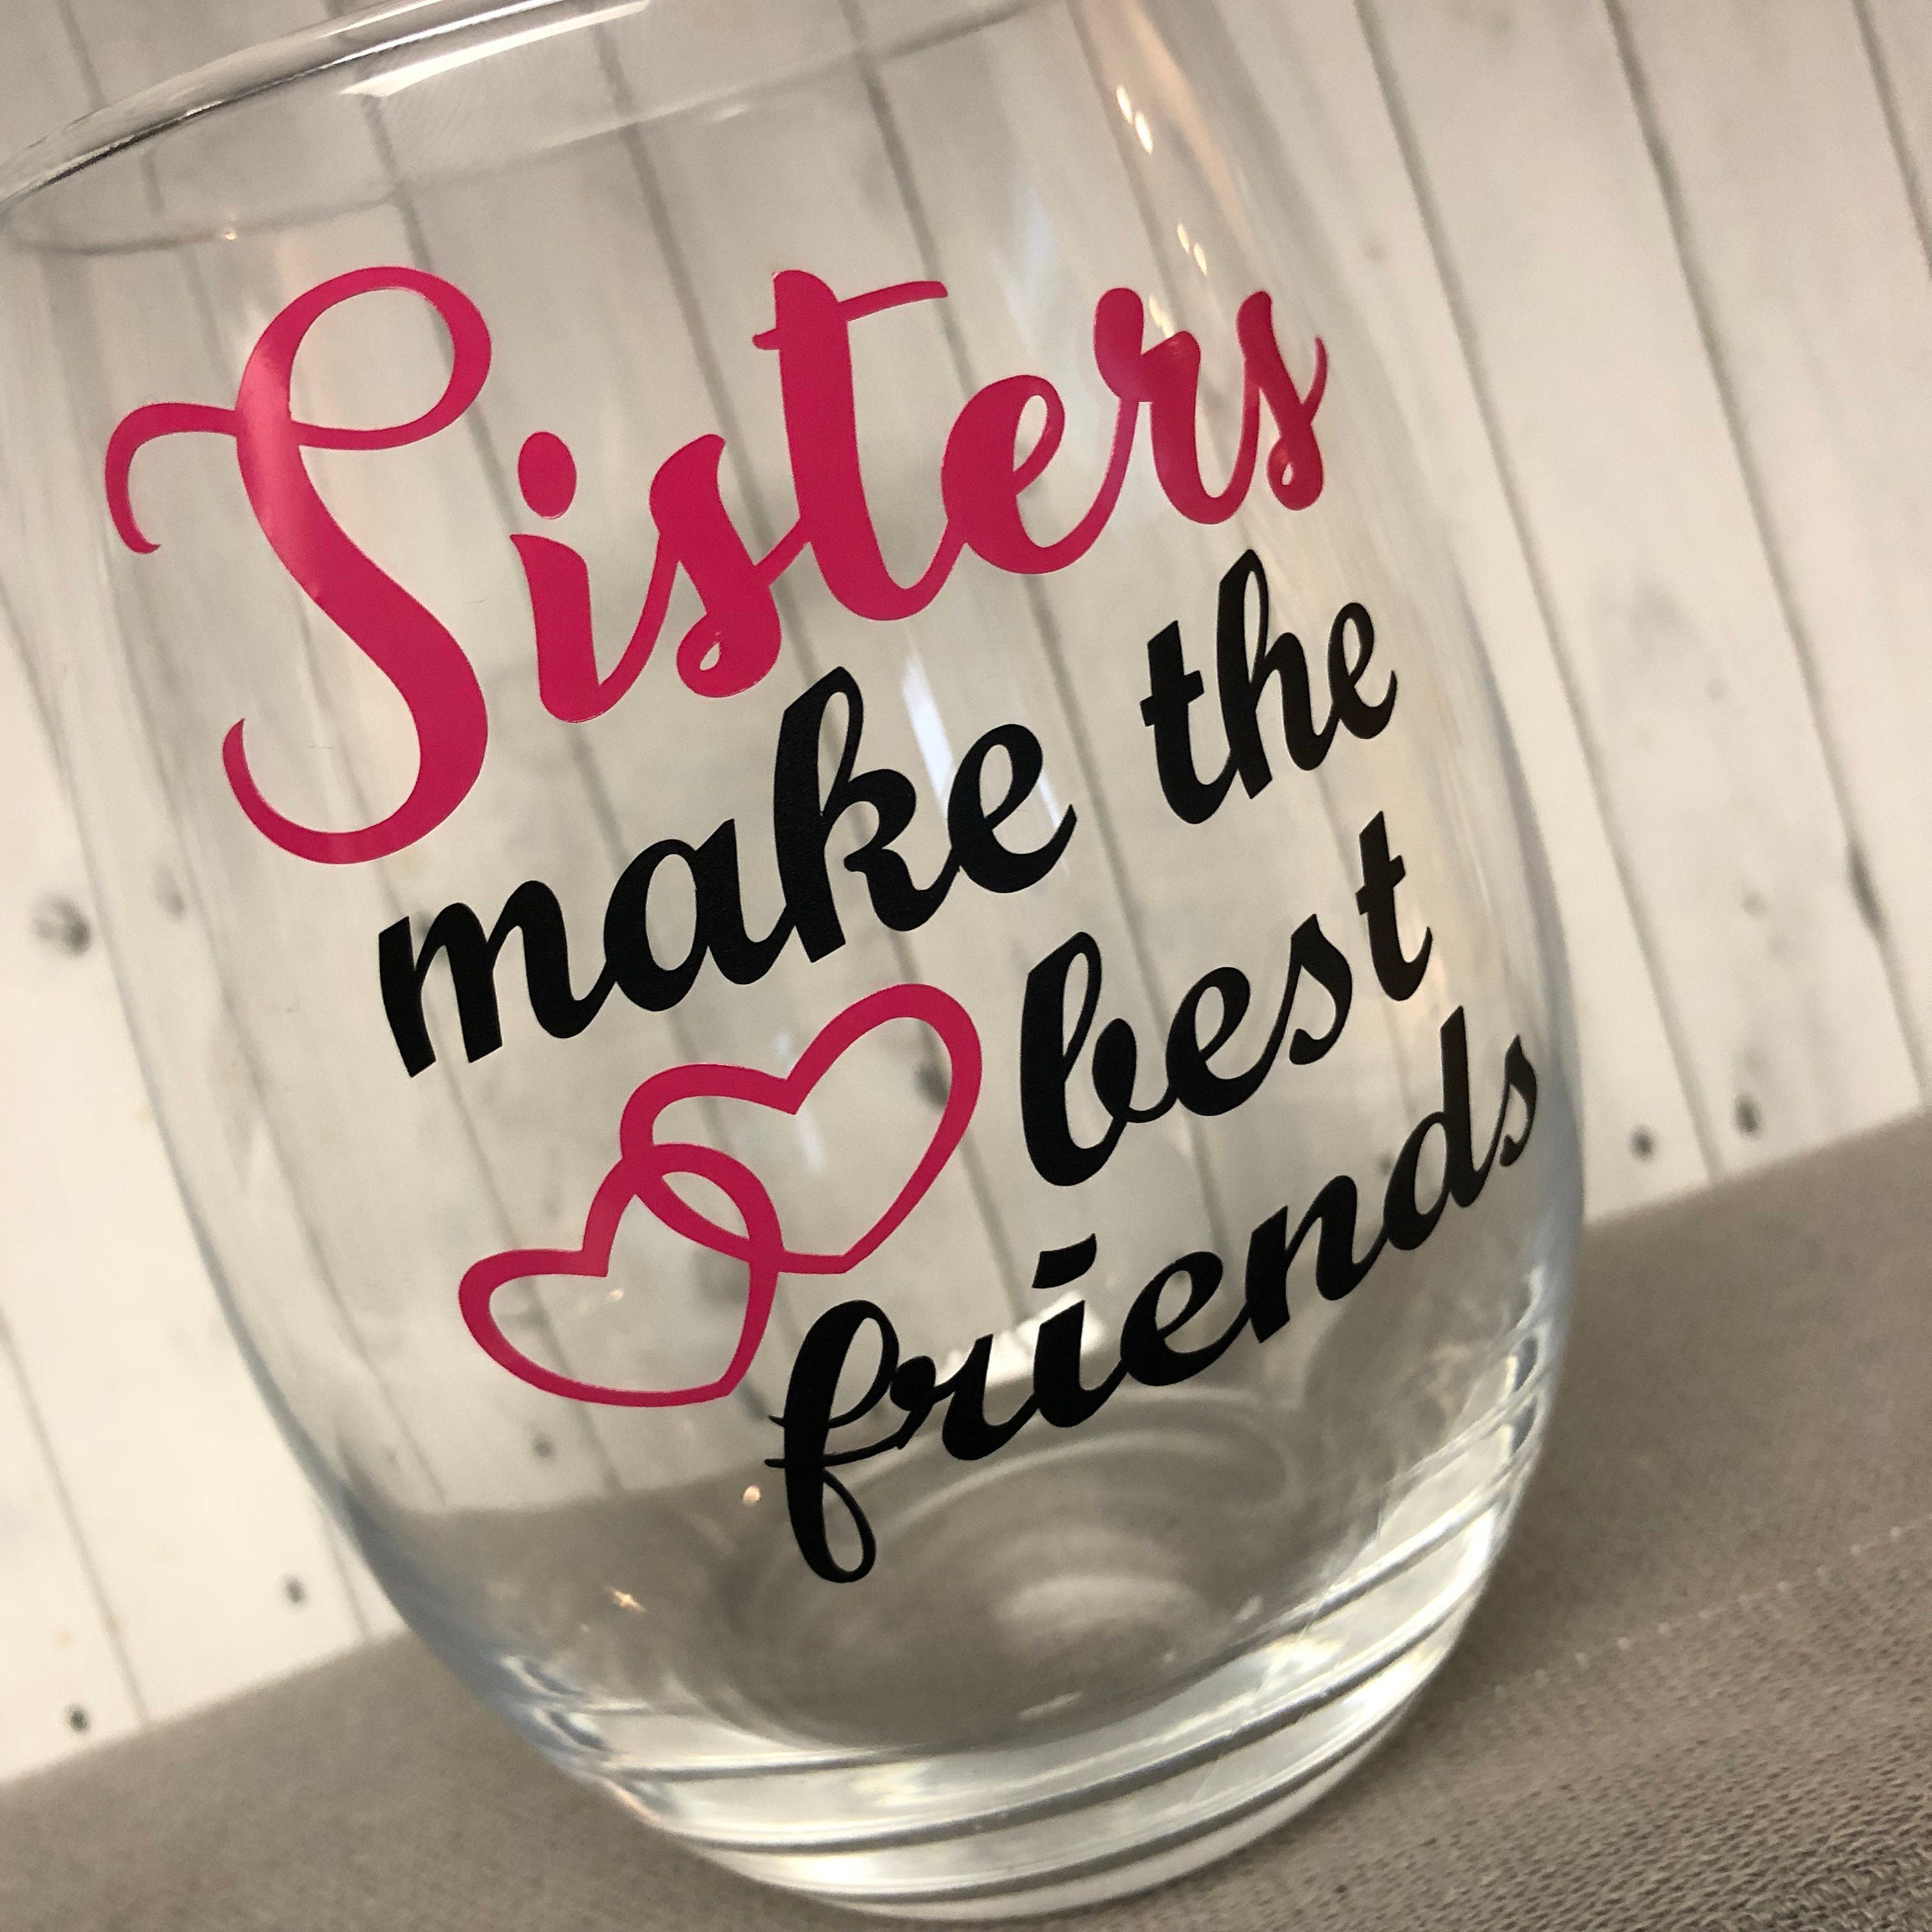 Best Sister Gift, Sister Moving Away Jewelry Dish, Sister Gifts, Birthday  Gifts From Sister, Long Distance Sister Gift for Sister - Etsy